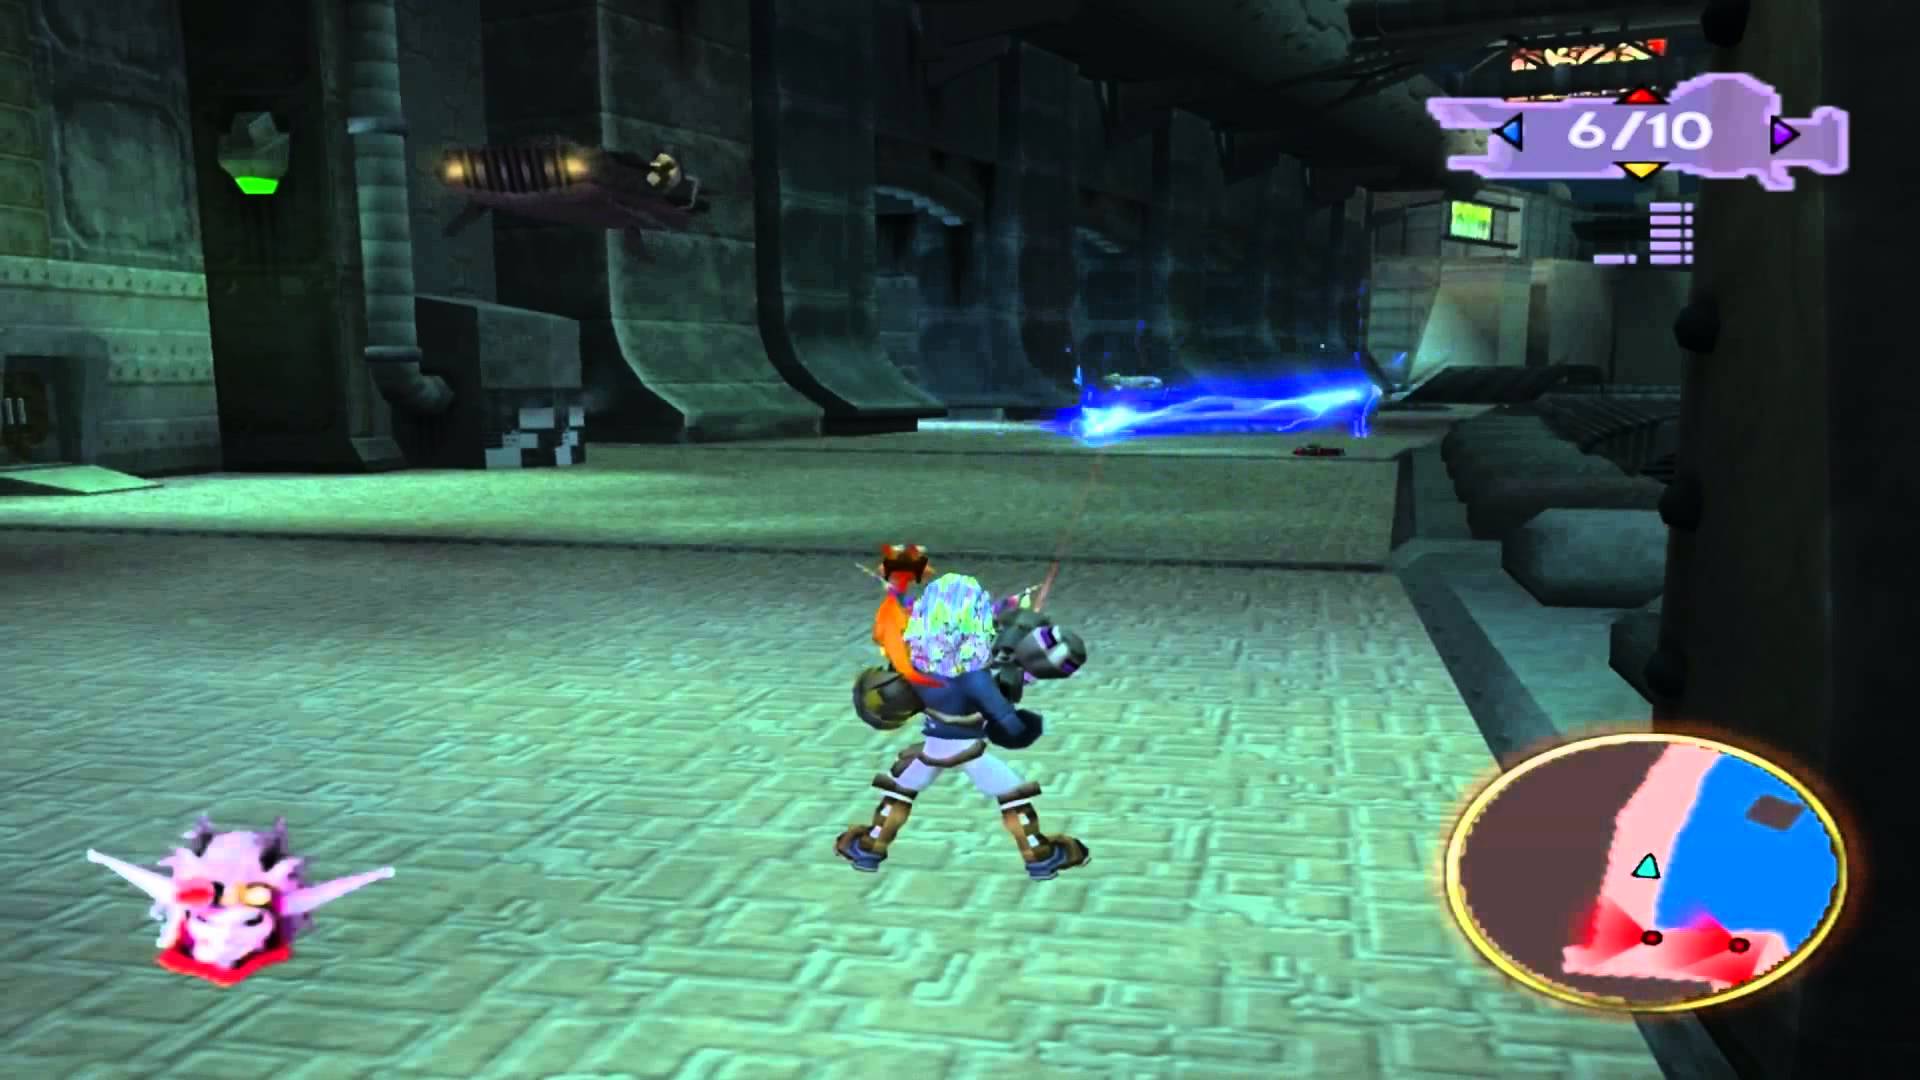 download jak 3 ps2 iso usa